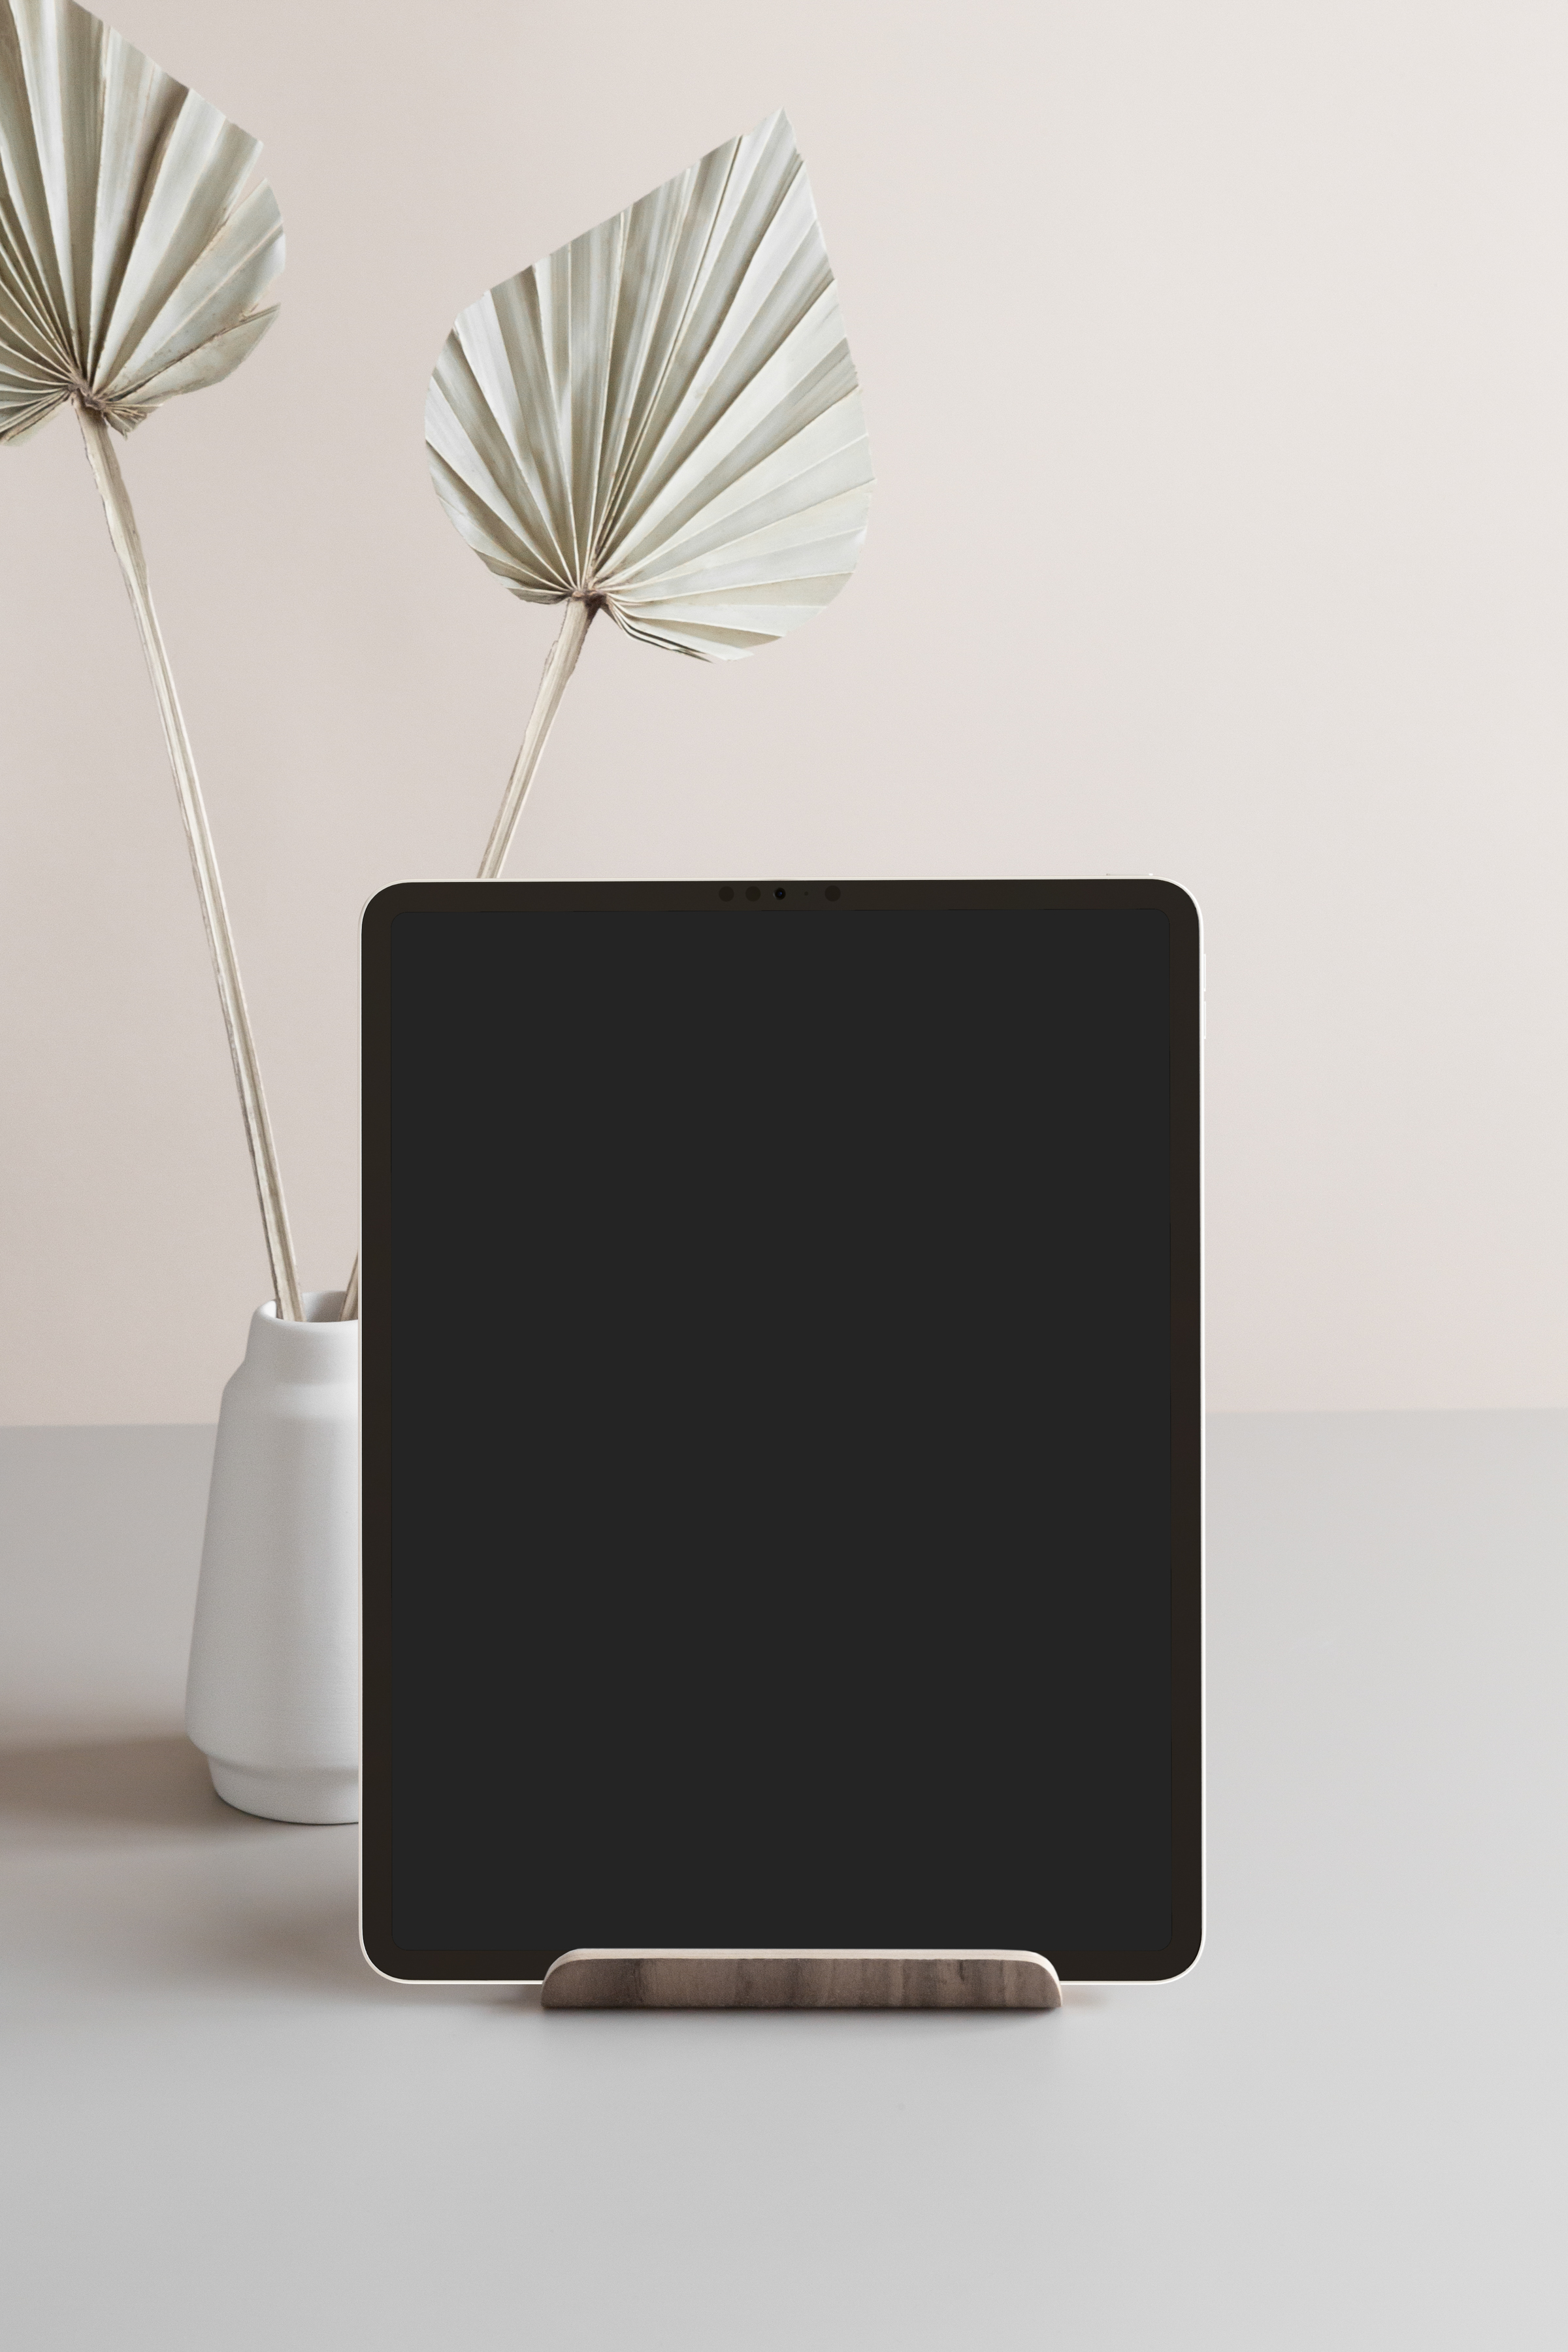 Ipad Mockup stock photography to highlight your own design